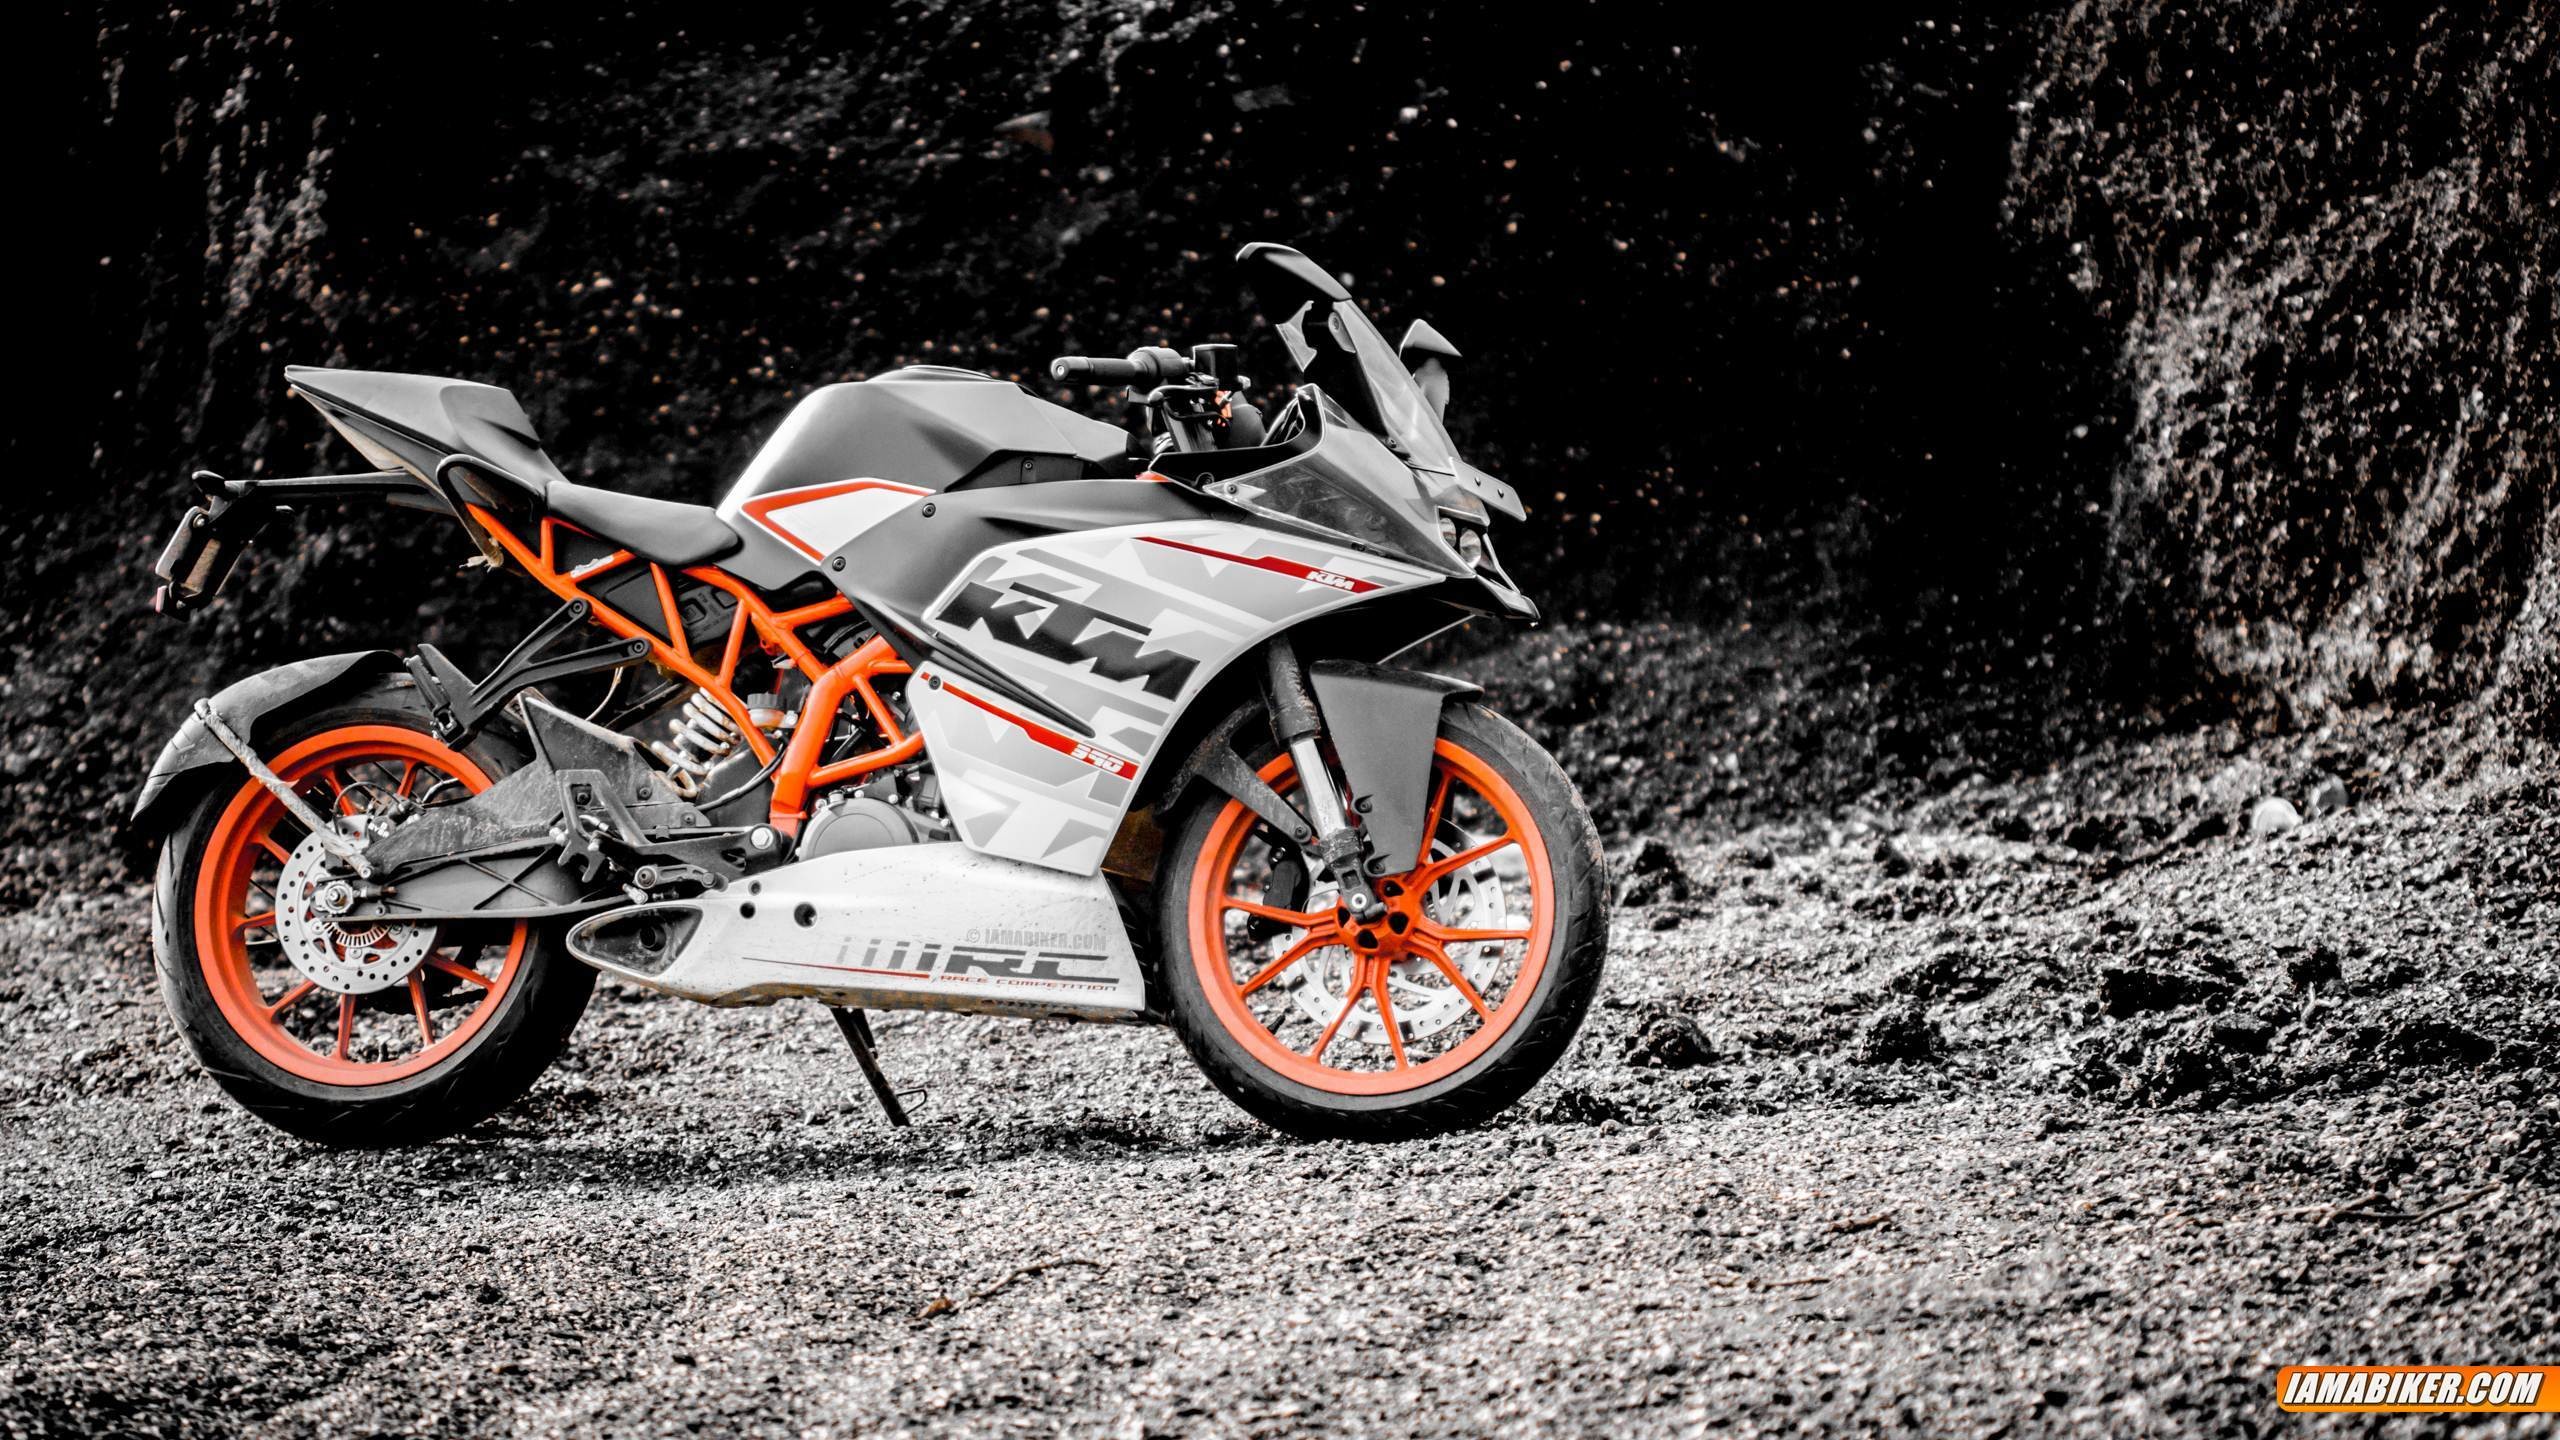 2560x1440 KTM RC 390 wallpapers - 2